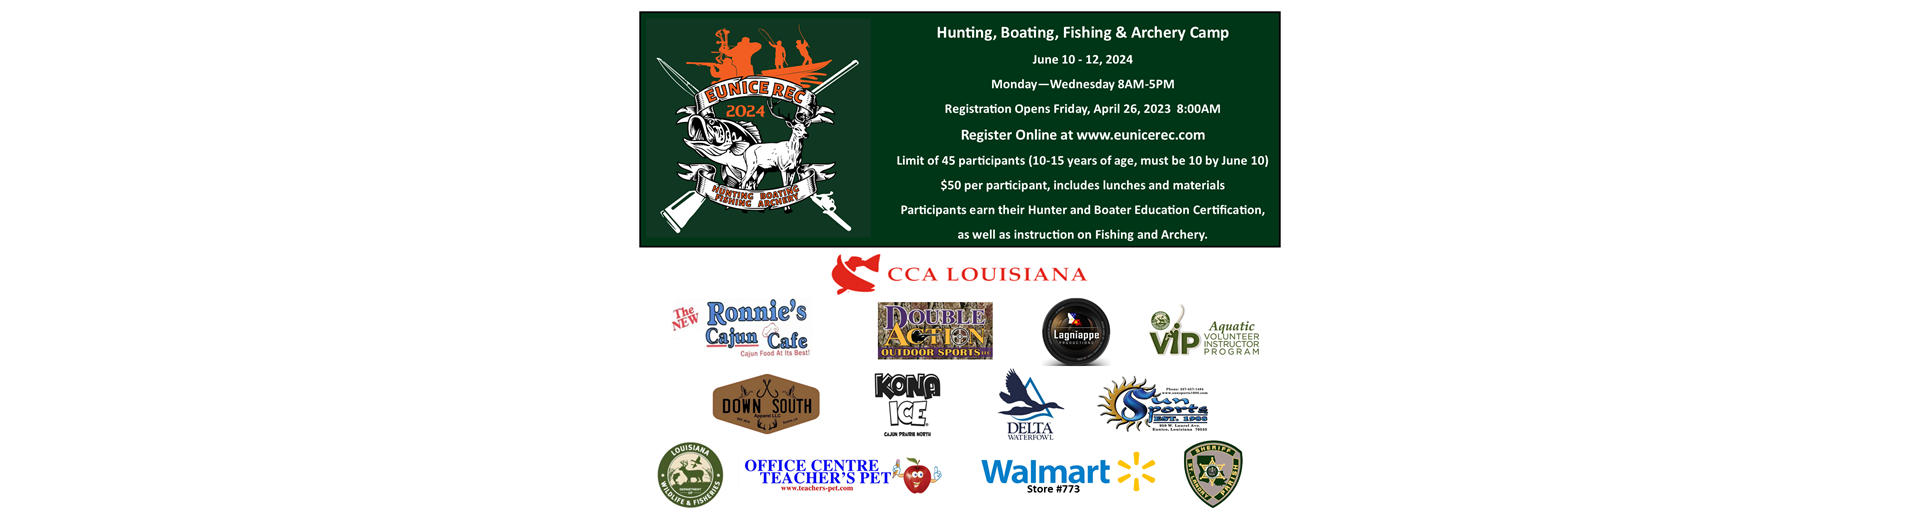 Hunting, Boating, Fishing & Archery Camp